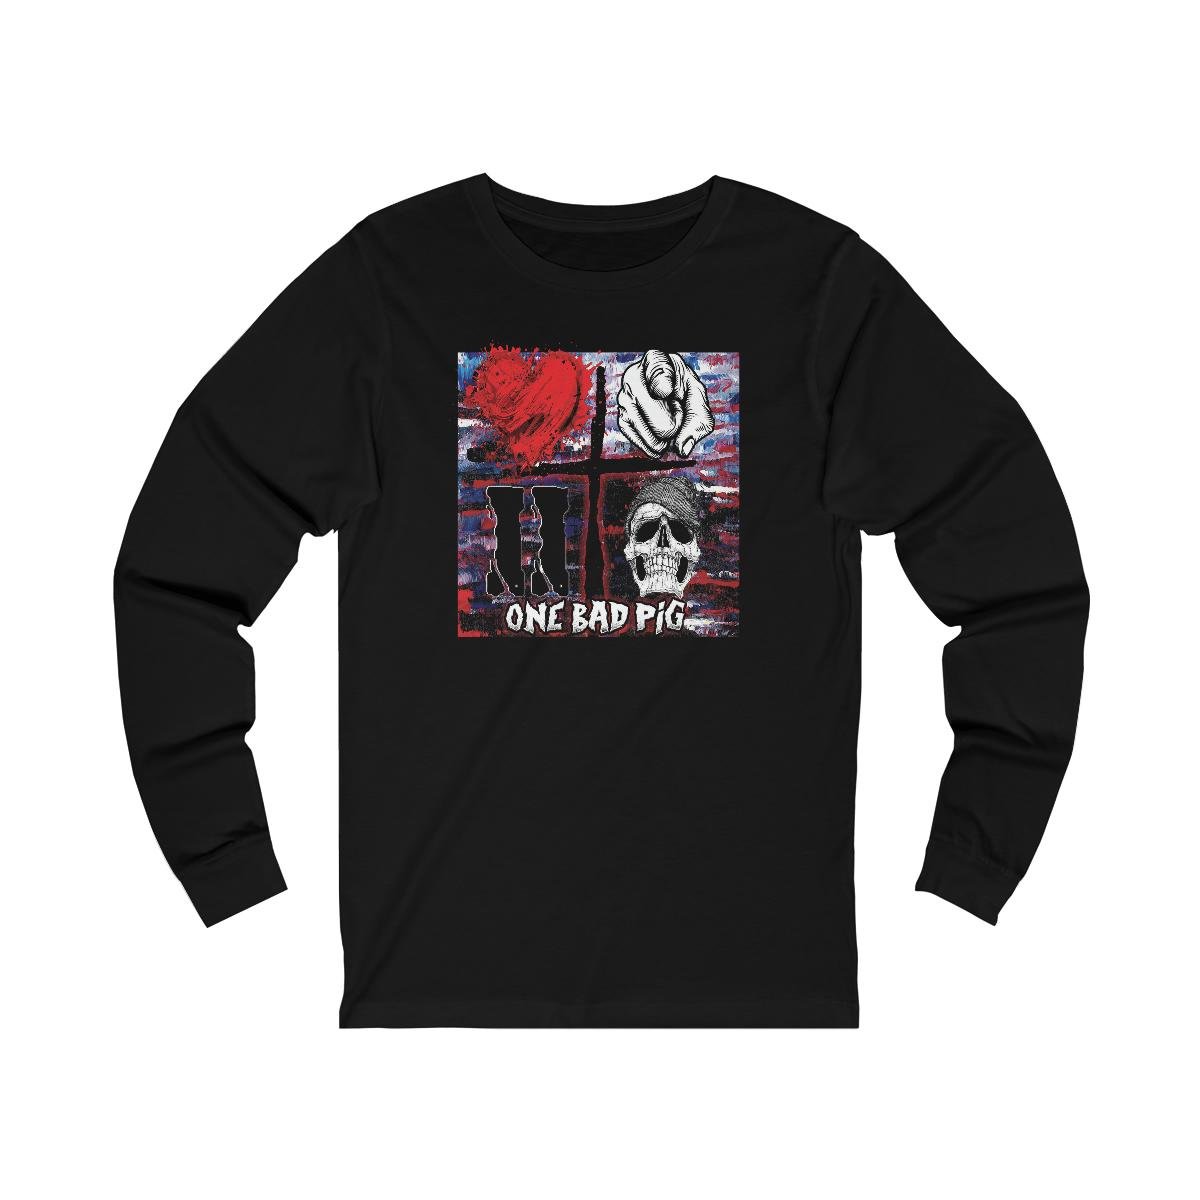 One Bad Pig – Love You To Death Long Sleeve Tshirt